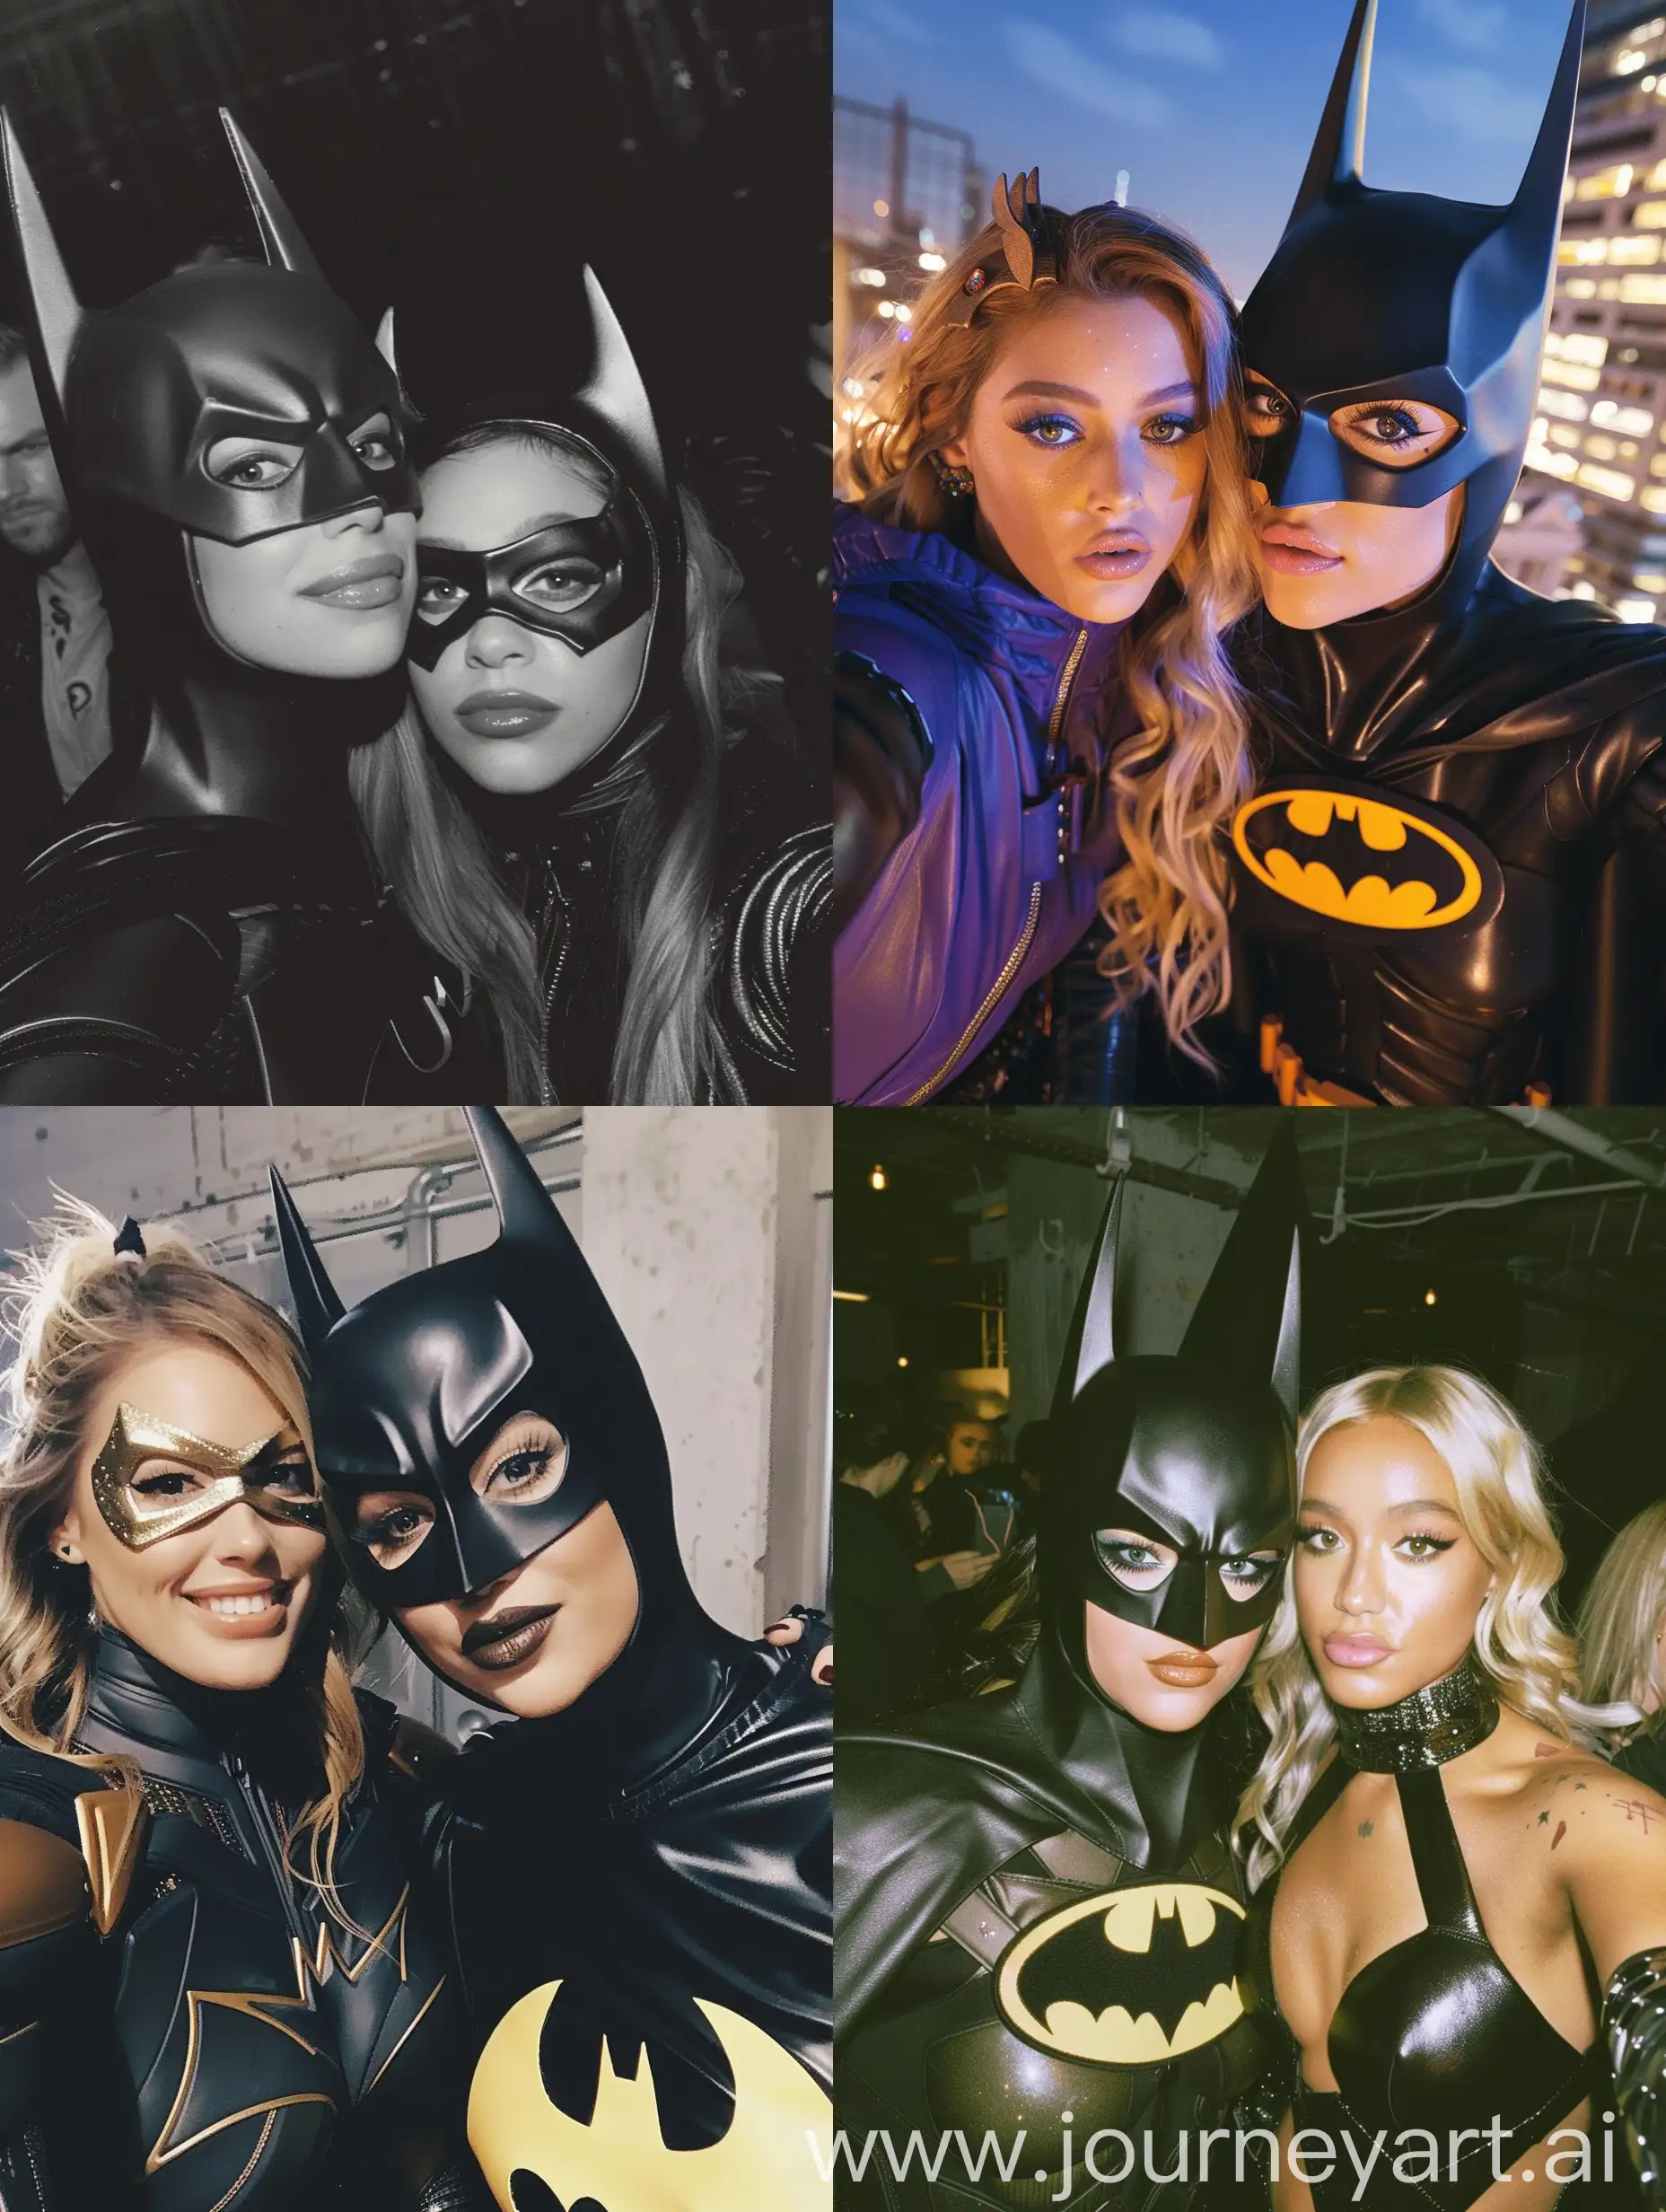 Miley-Cyrus-and-Ariana-Grande-as-Batgirl-Taking-Selfies-in-Retro-VHS-Style